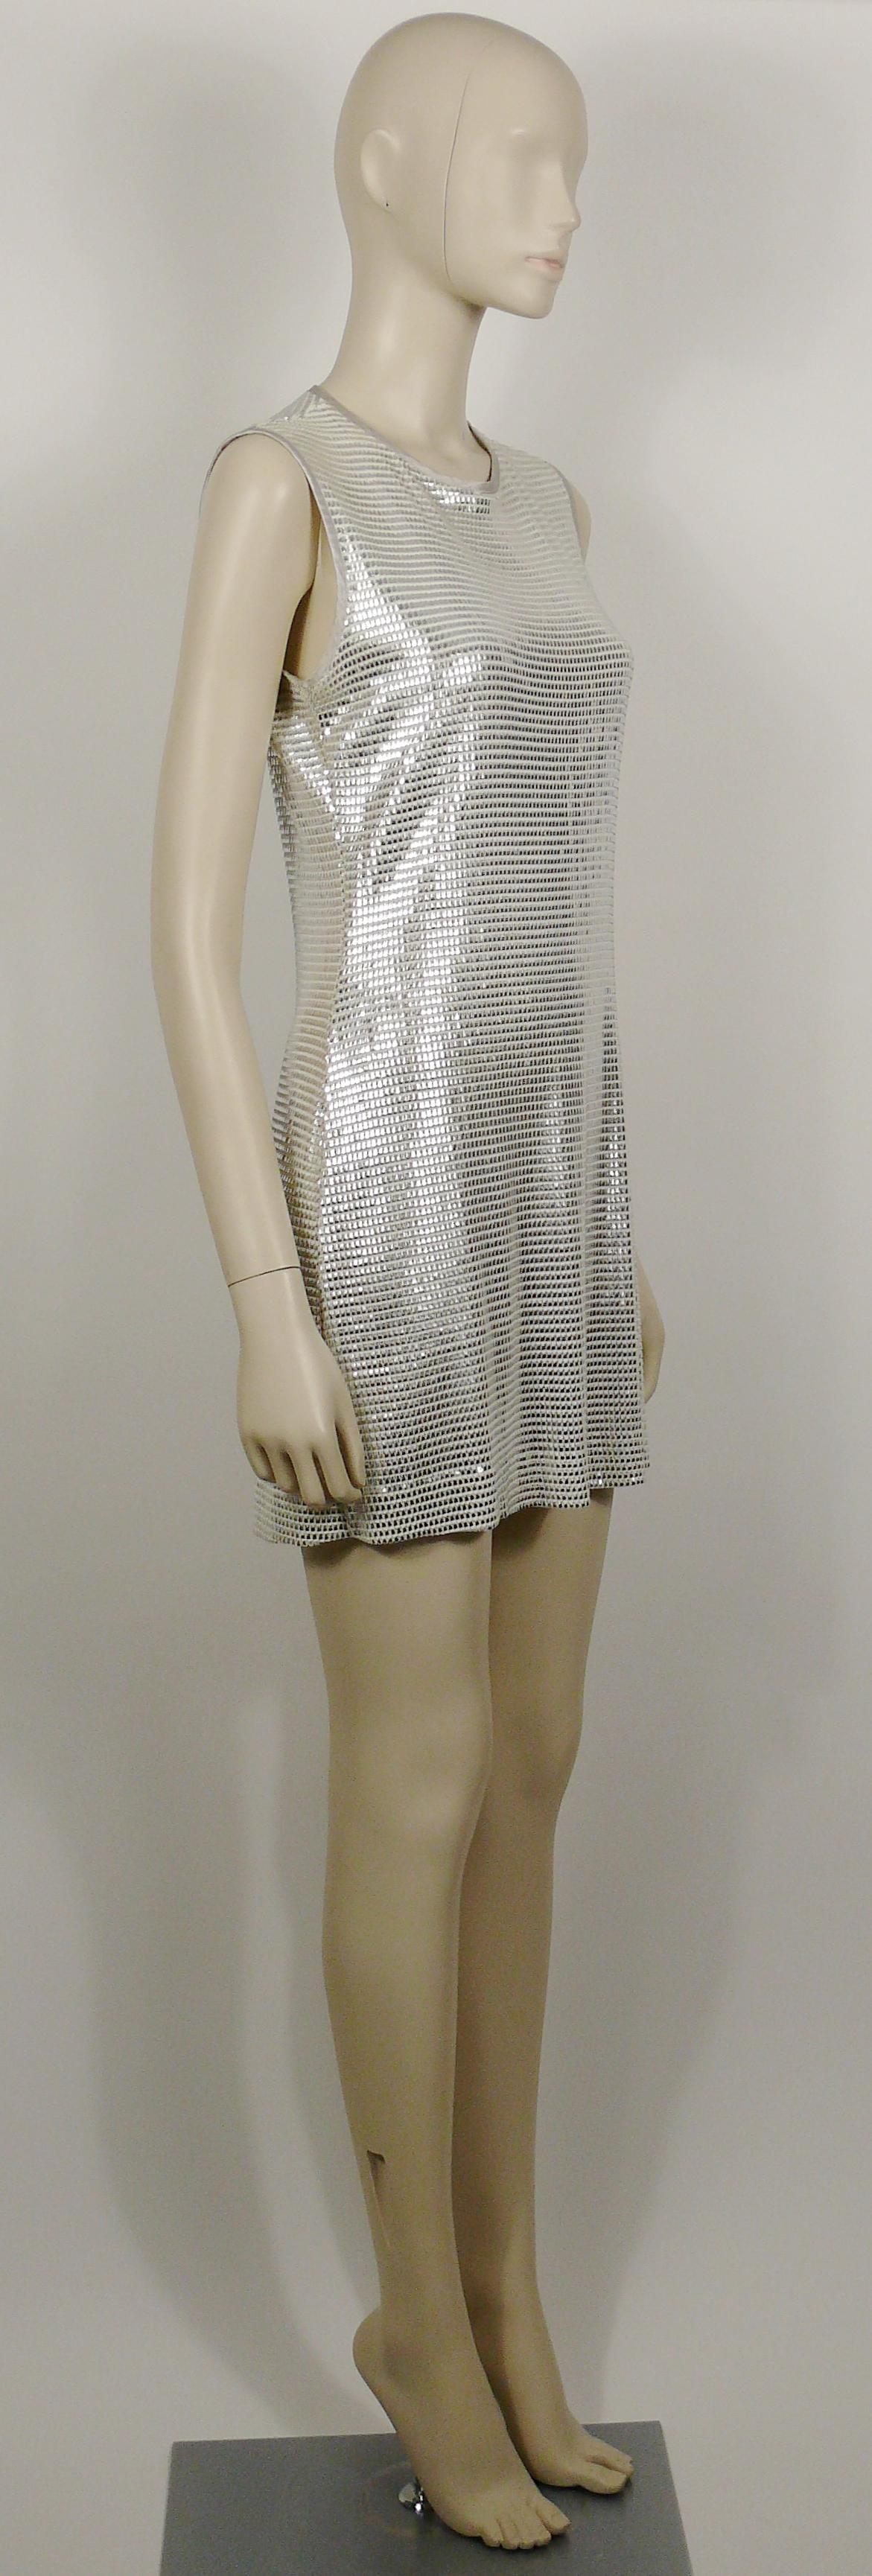 PACO RABANNE white mini dress with silver foil grid.

Top surface is silver foil printed creating a metallic chain mail effect on a white knit spandex base.

Slips on.
Hook neck closure.
Unlined.

Label reads PACO RABANNE Paris.
Made in